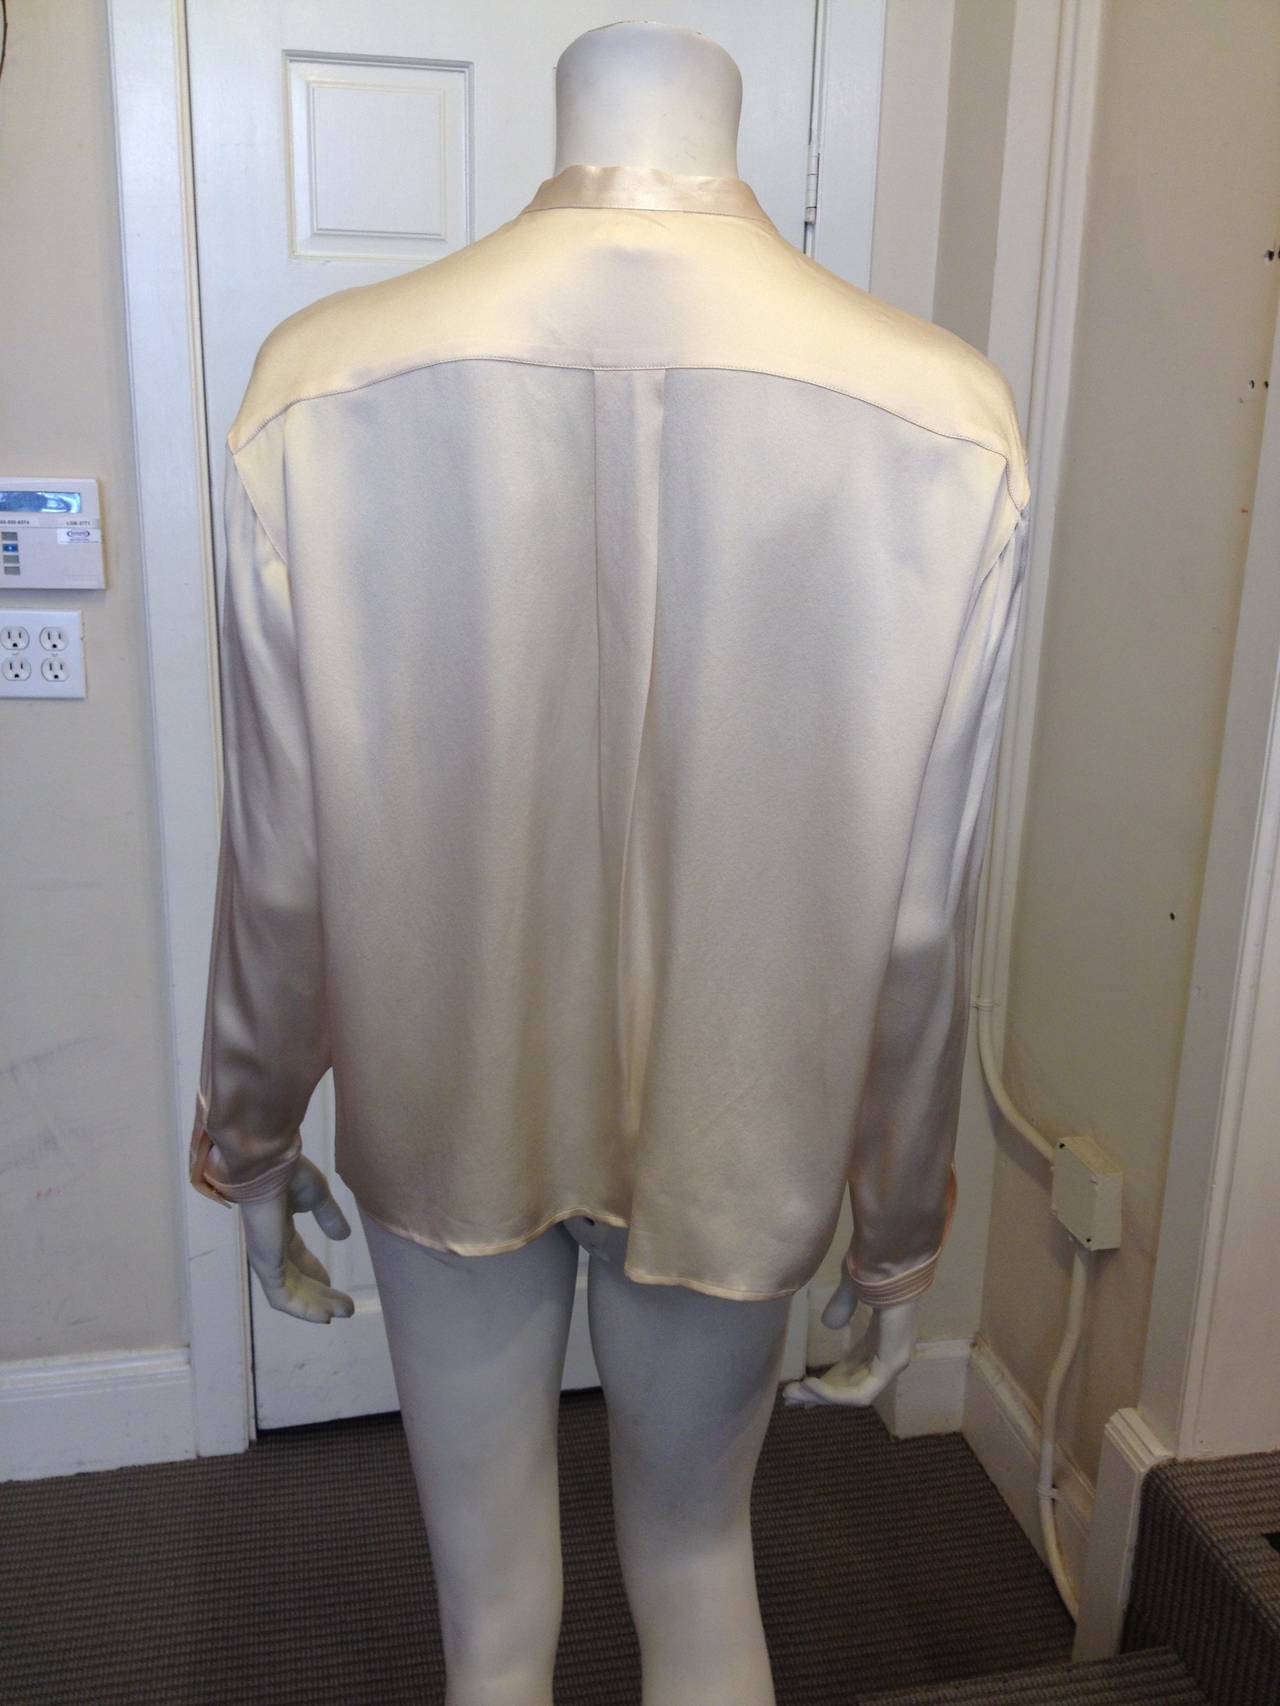 Women's Chanel Vintage Cream Satin Blouse with Bow Tie